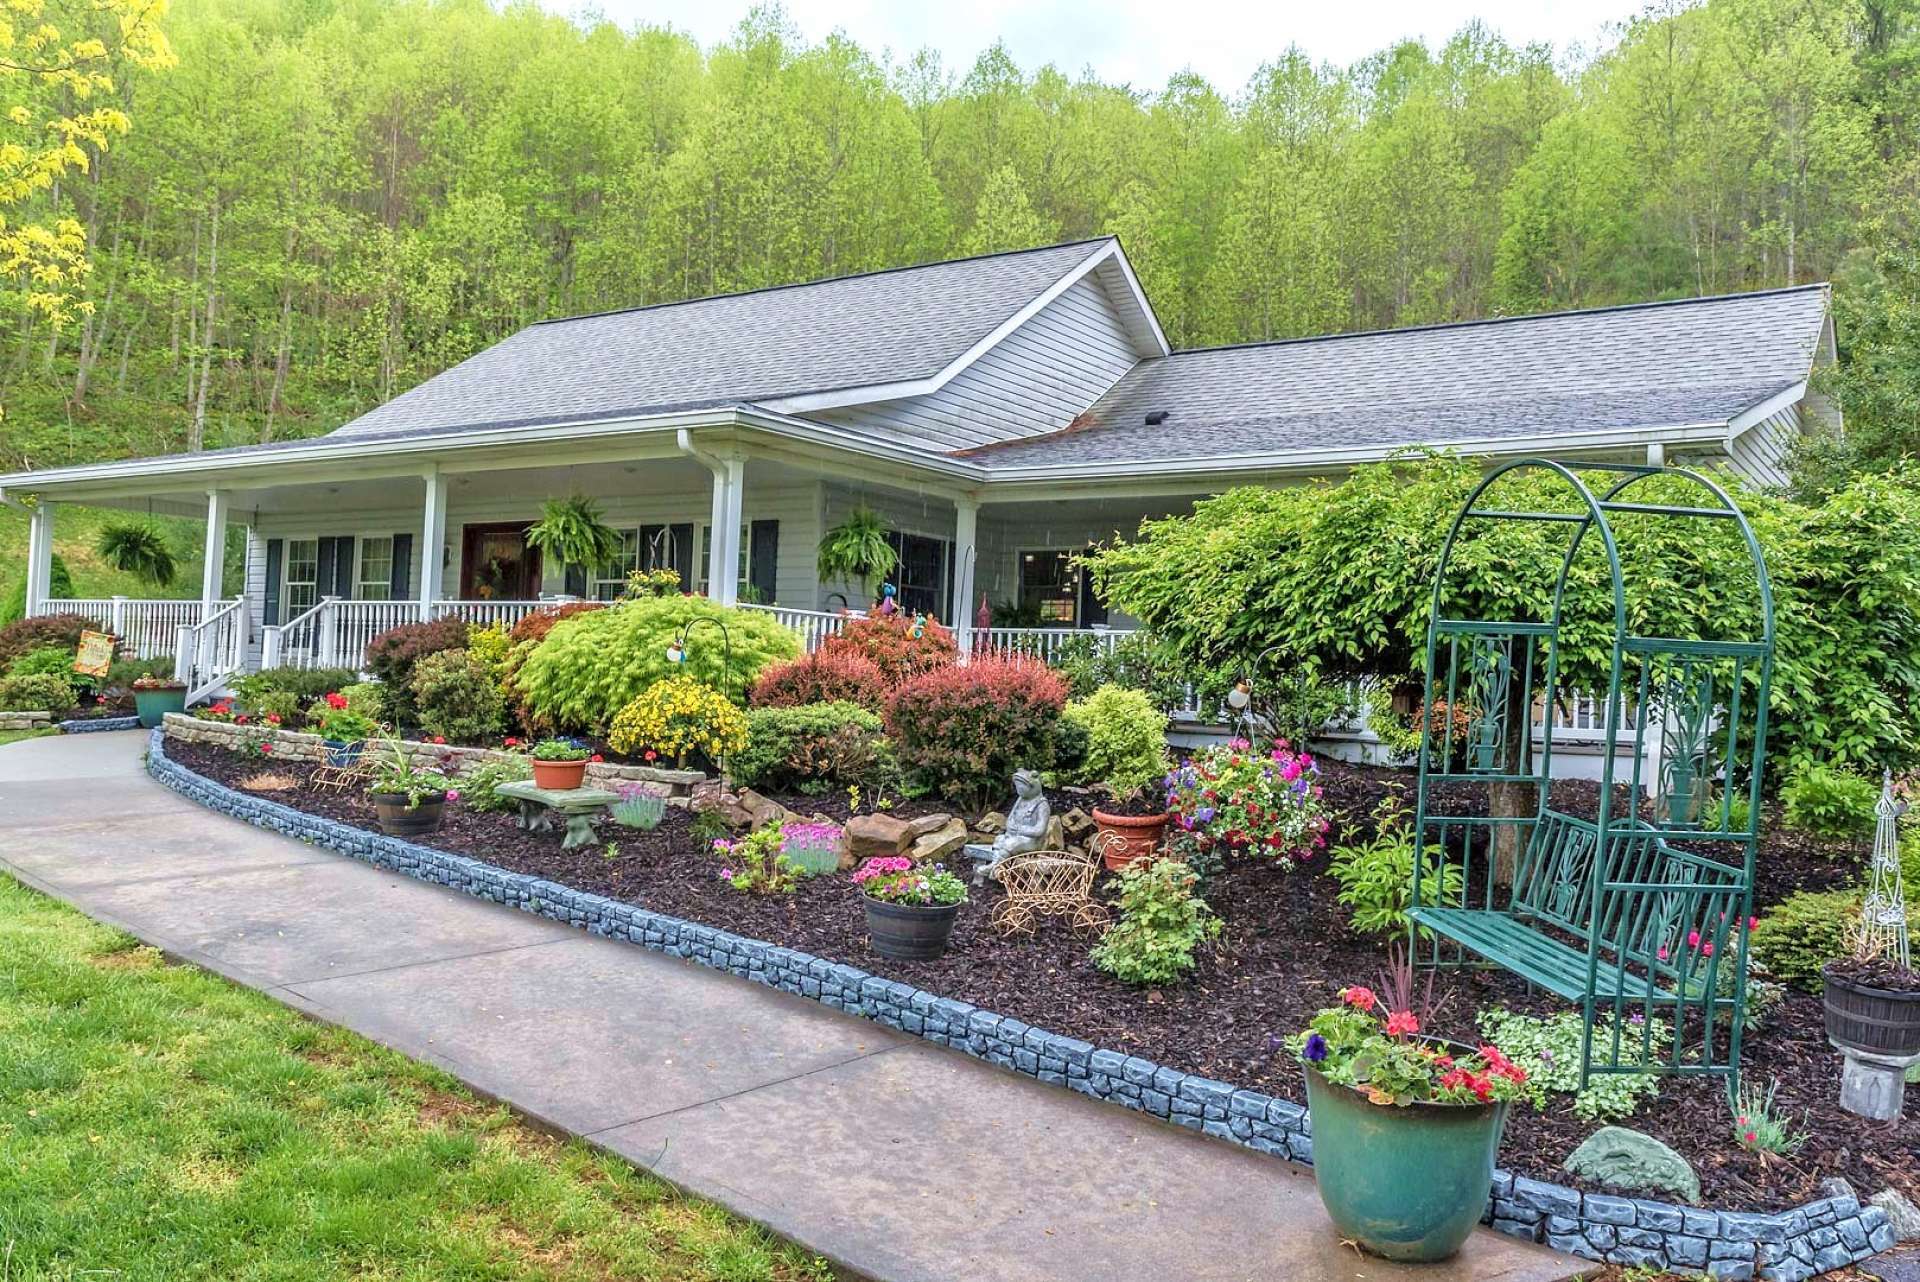 Lovingly landscaped, this 3-bedroom, 3.5 bath home welcomes you home and invites you to enjoy country living at its finest.